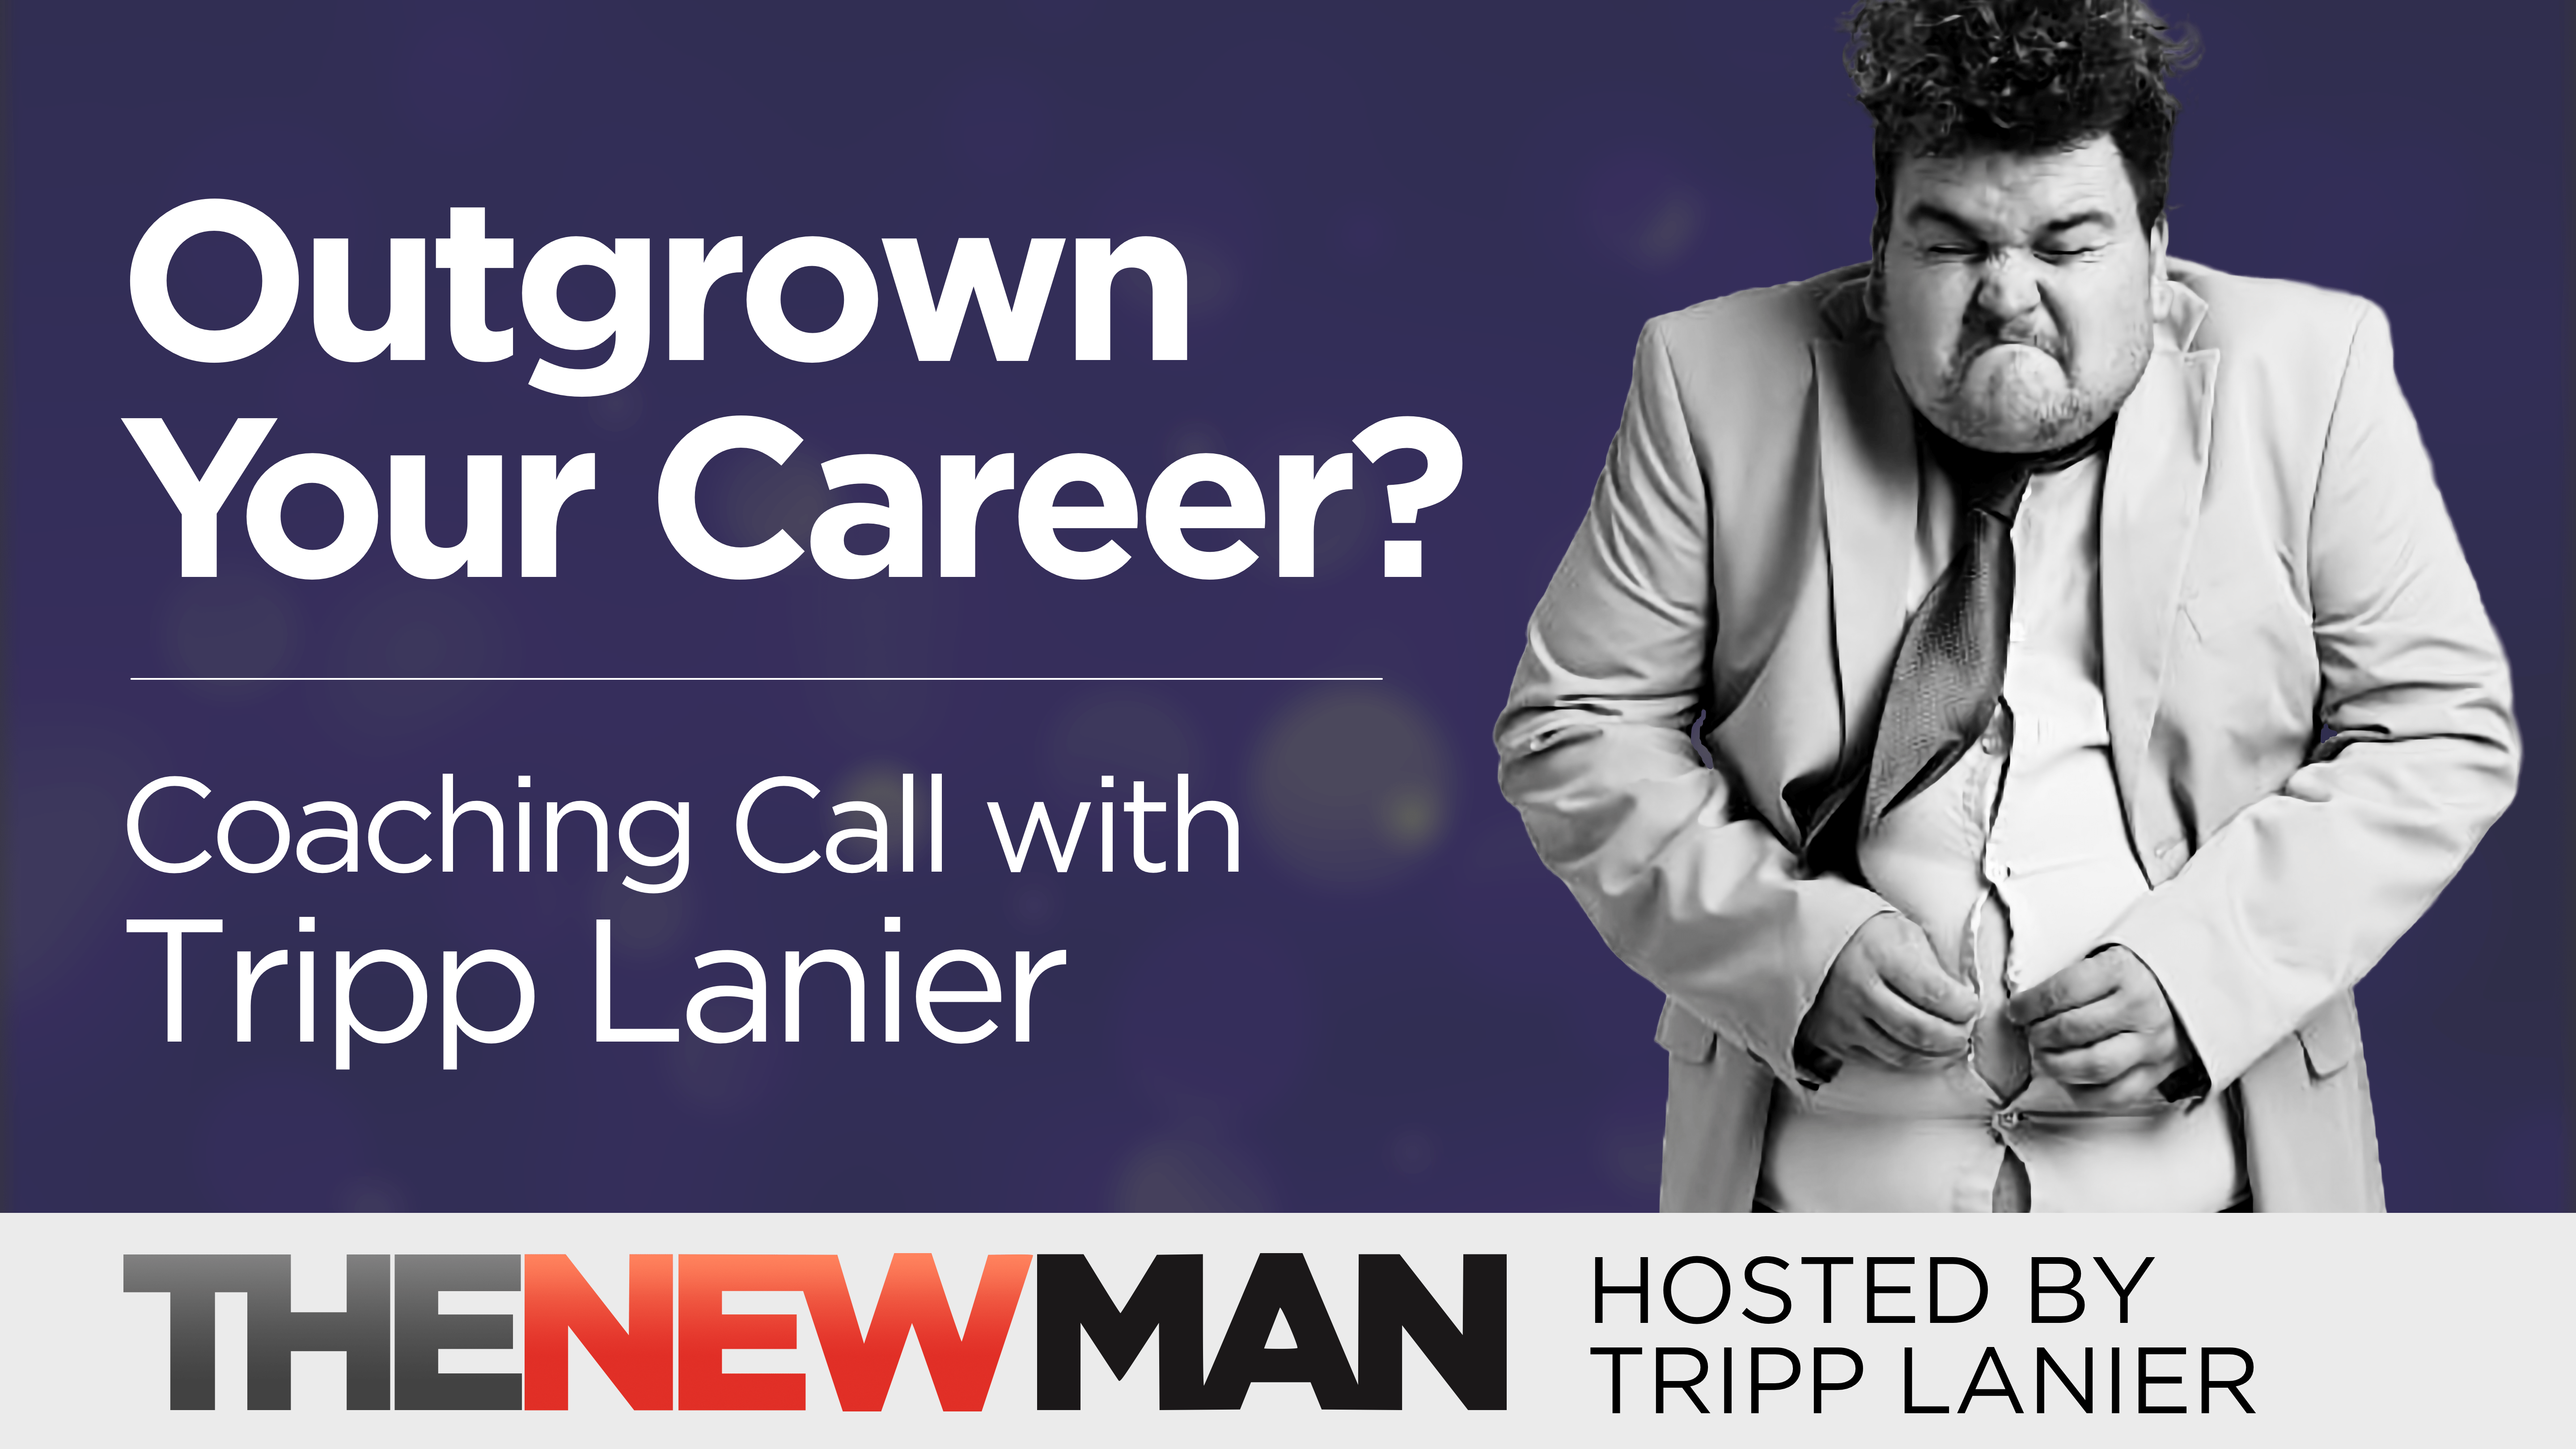 Have You Outgrown Your Career? — Coaching Call with Tripp Lanier